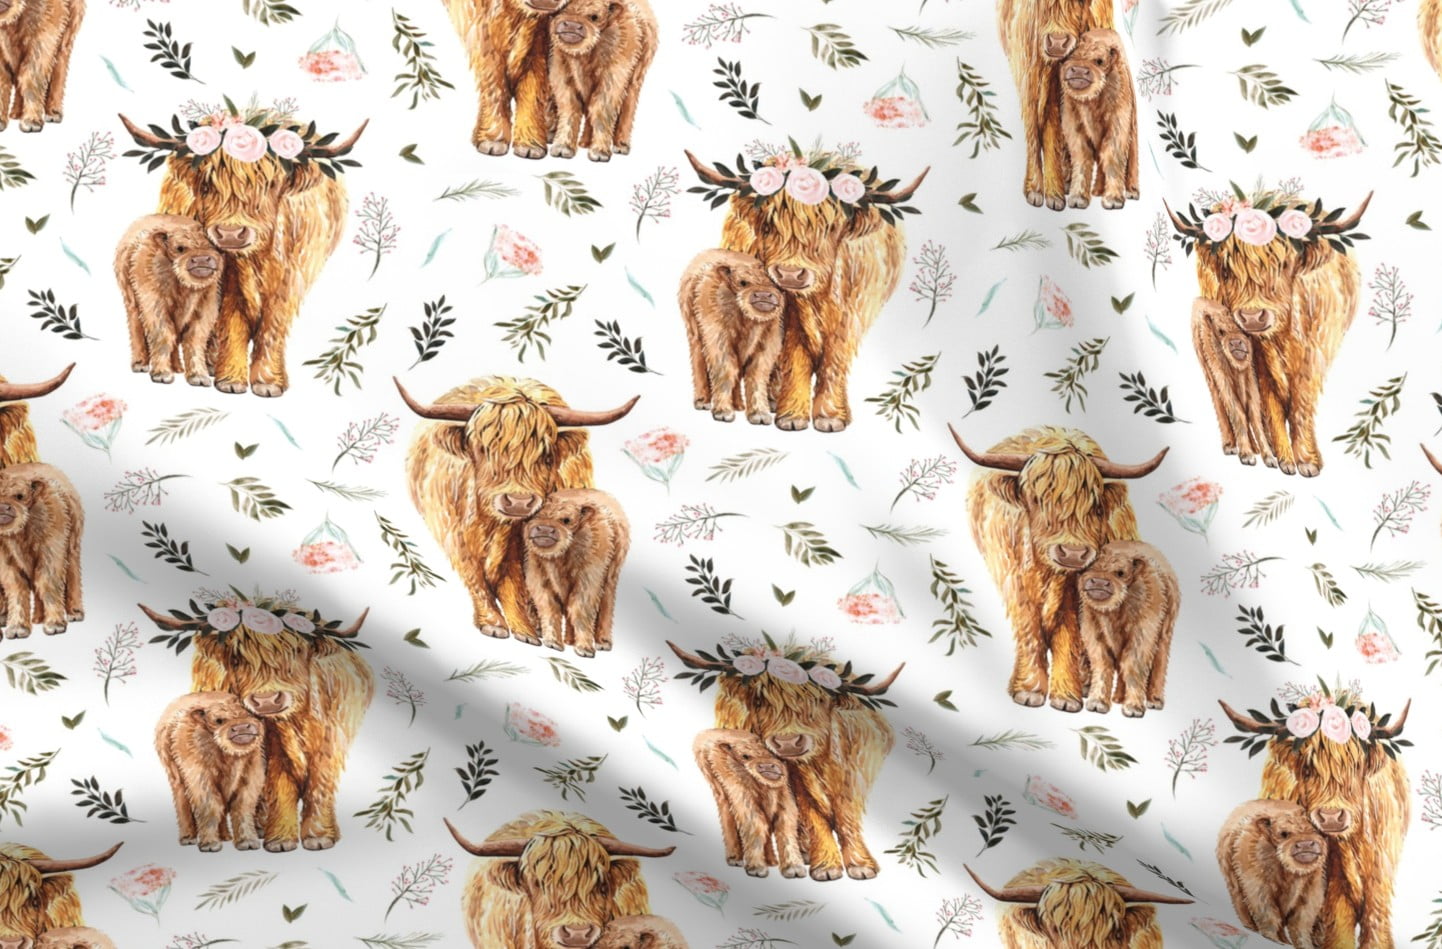 Cute Baby Highland Cows Fabric Quilting Cotton / Charm - 5 x 5